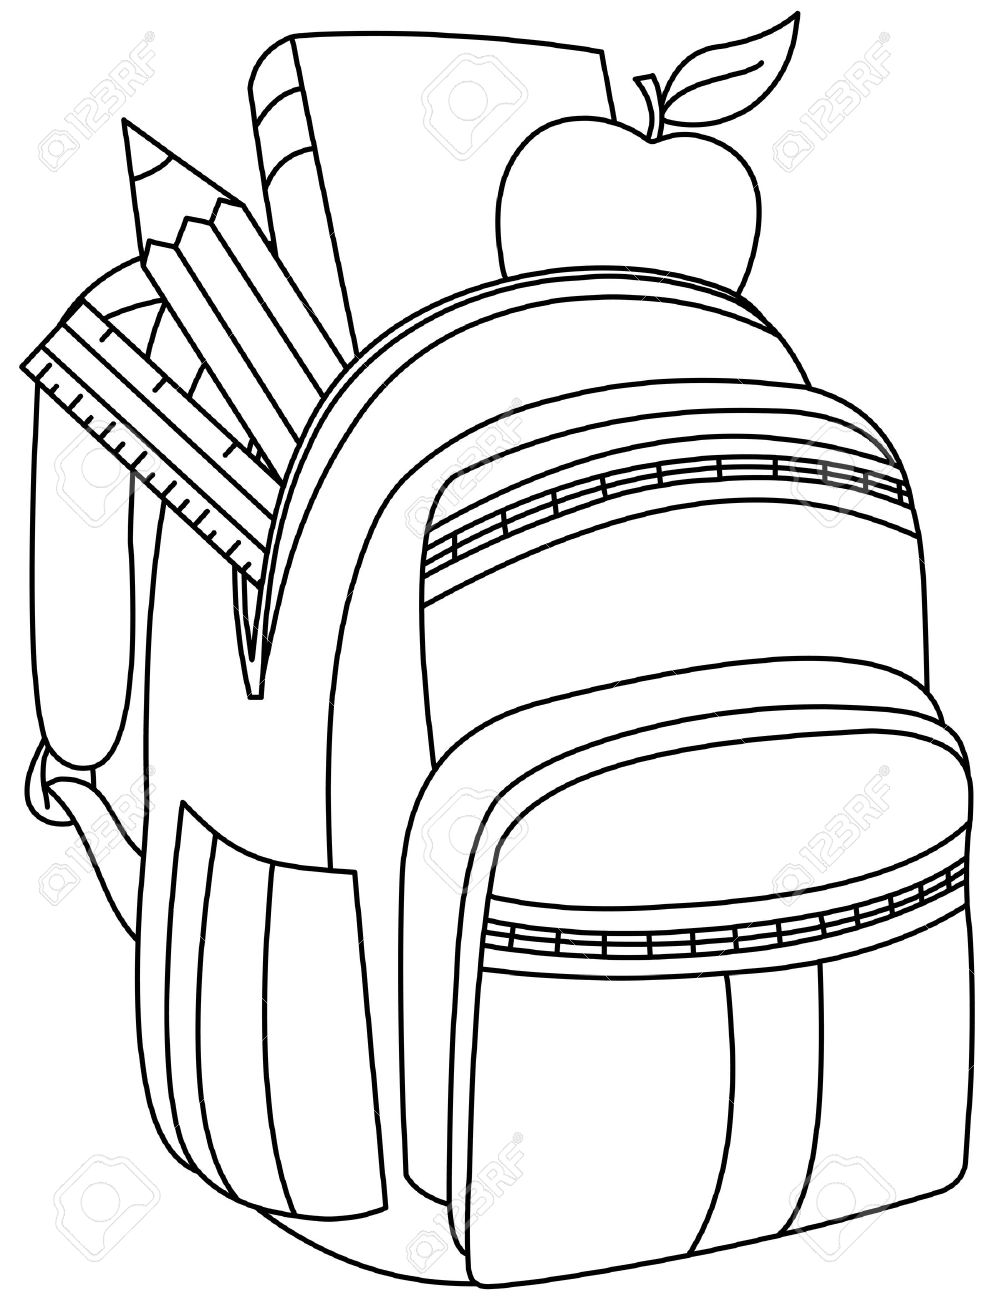 Outlined school backpack vector illustration coloring page royalty free svg cliparts vectors and stock illustration image